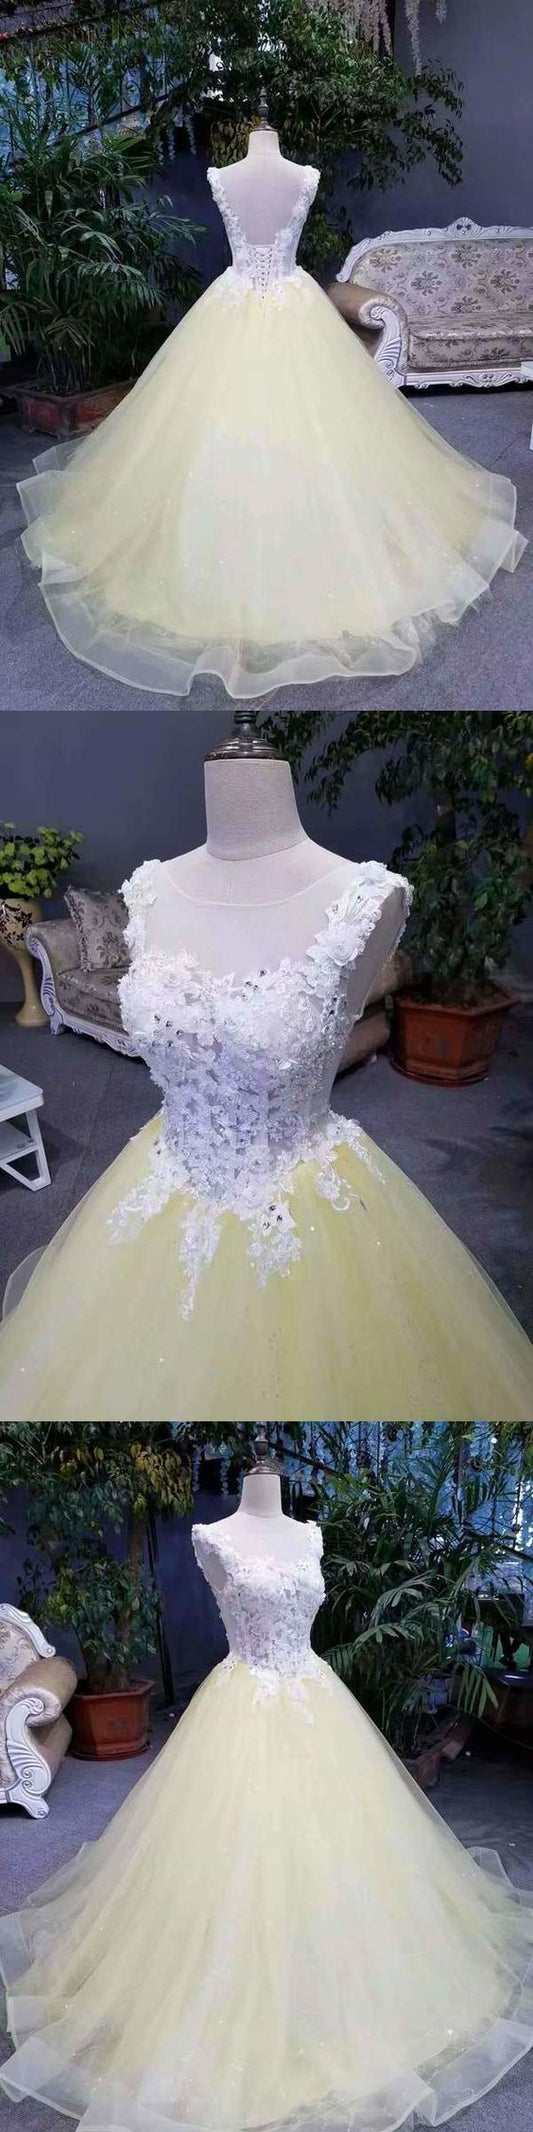 New Arrival Quinceanera prom Dresses A-Line Lace Up Cheap Price Scoop Neck With Beads And Appliques  cg9746